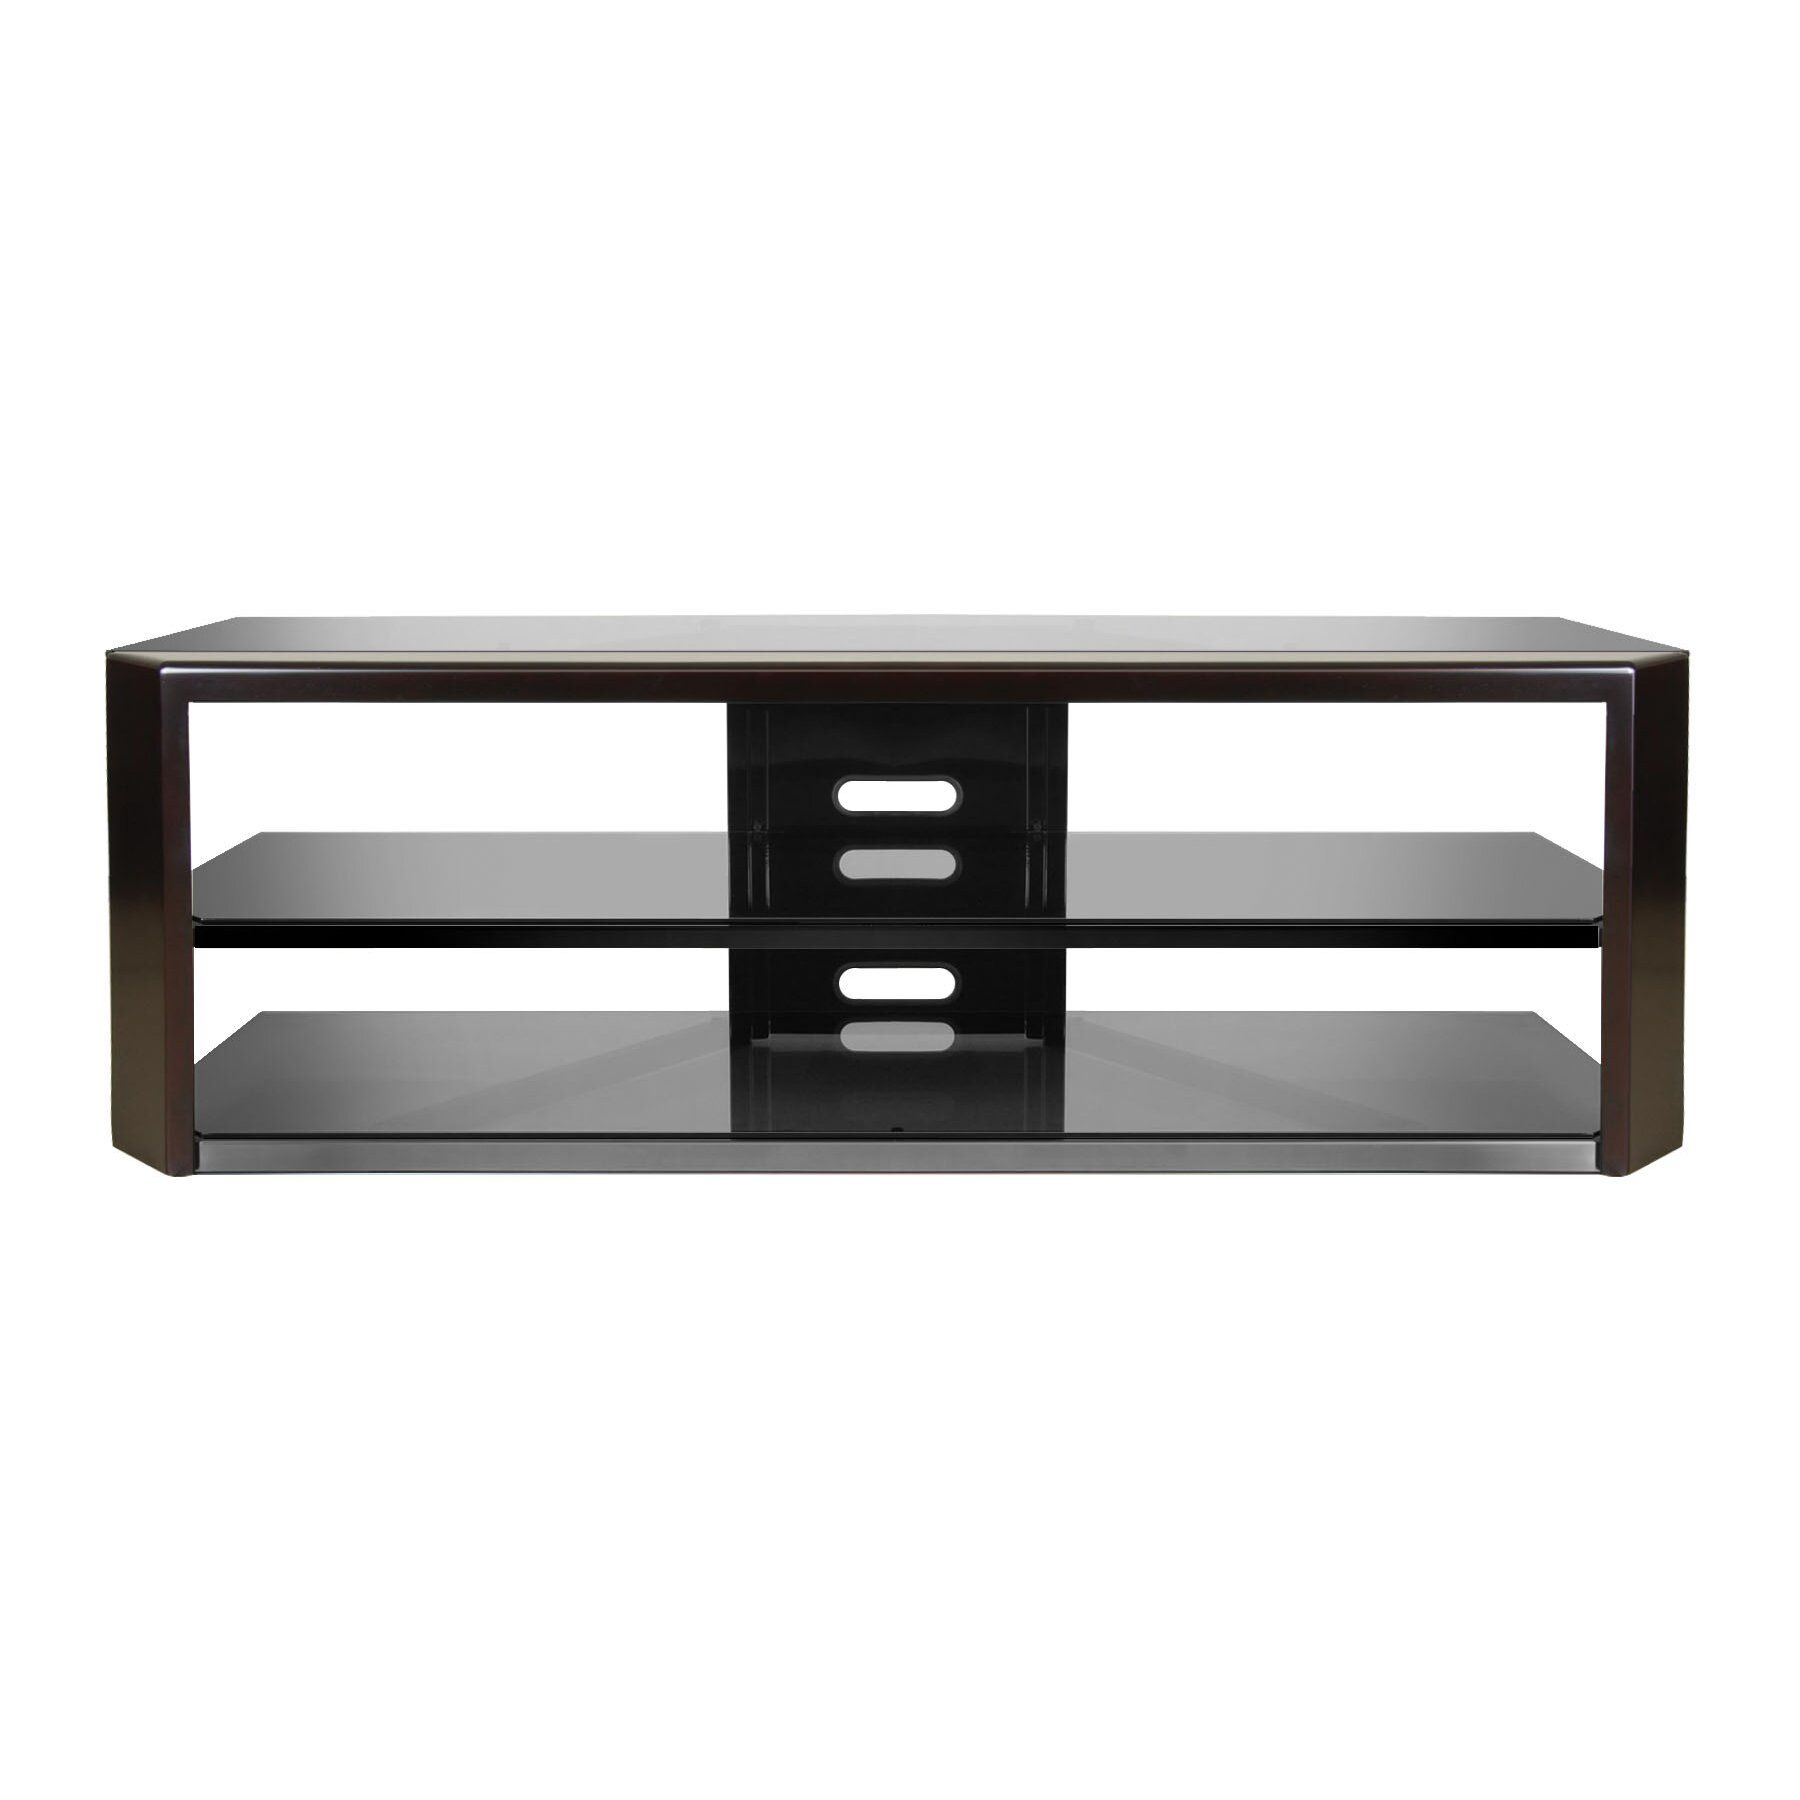 Bello Tv Stand | Wayfair For Bjs Tv Stands (View 9 of 15)